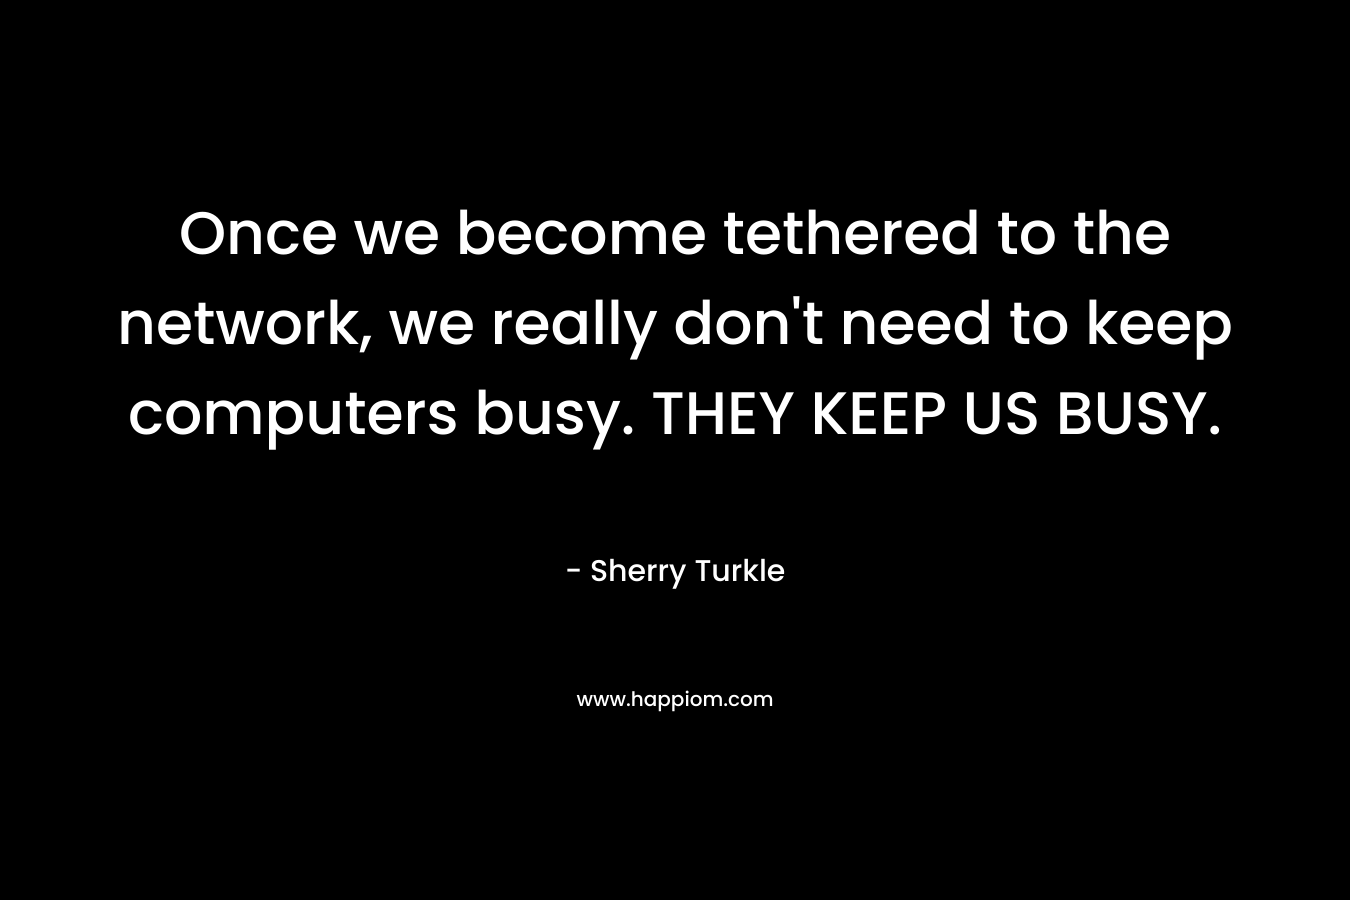 Once we become tethered to the network, we really don't need to keep computers busy. THEY KEEP US BUSY.